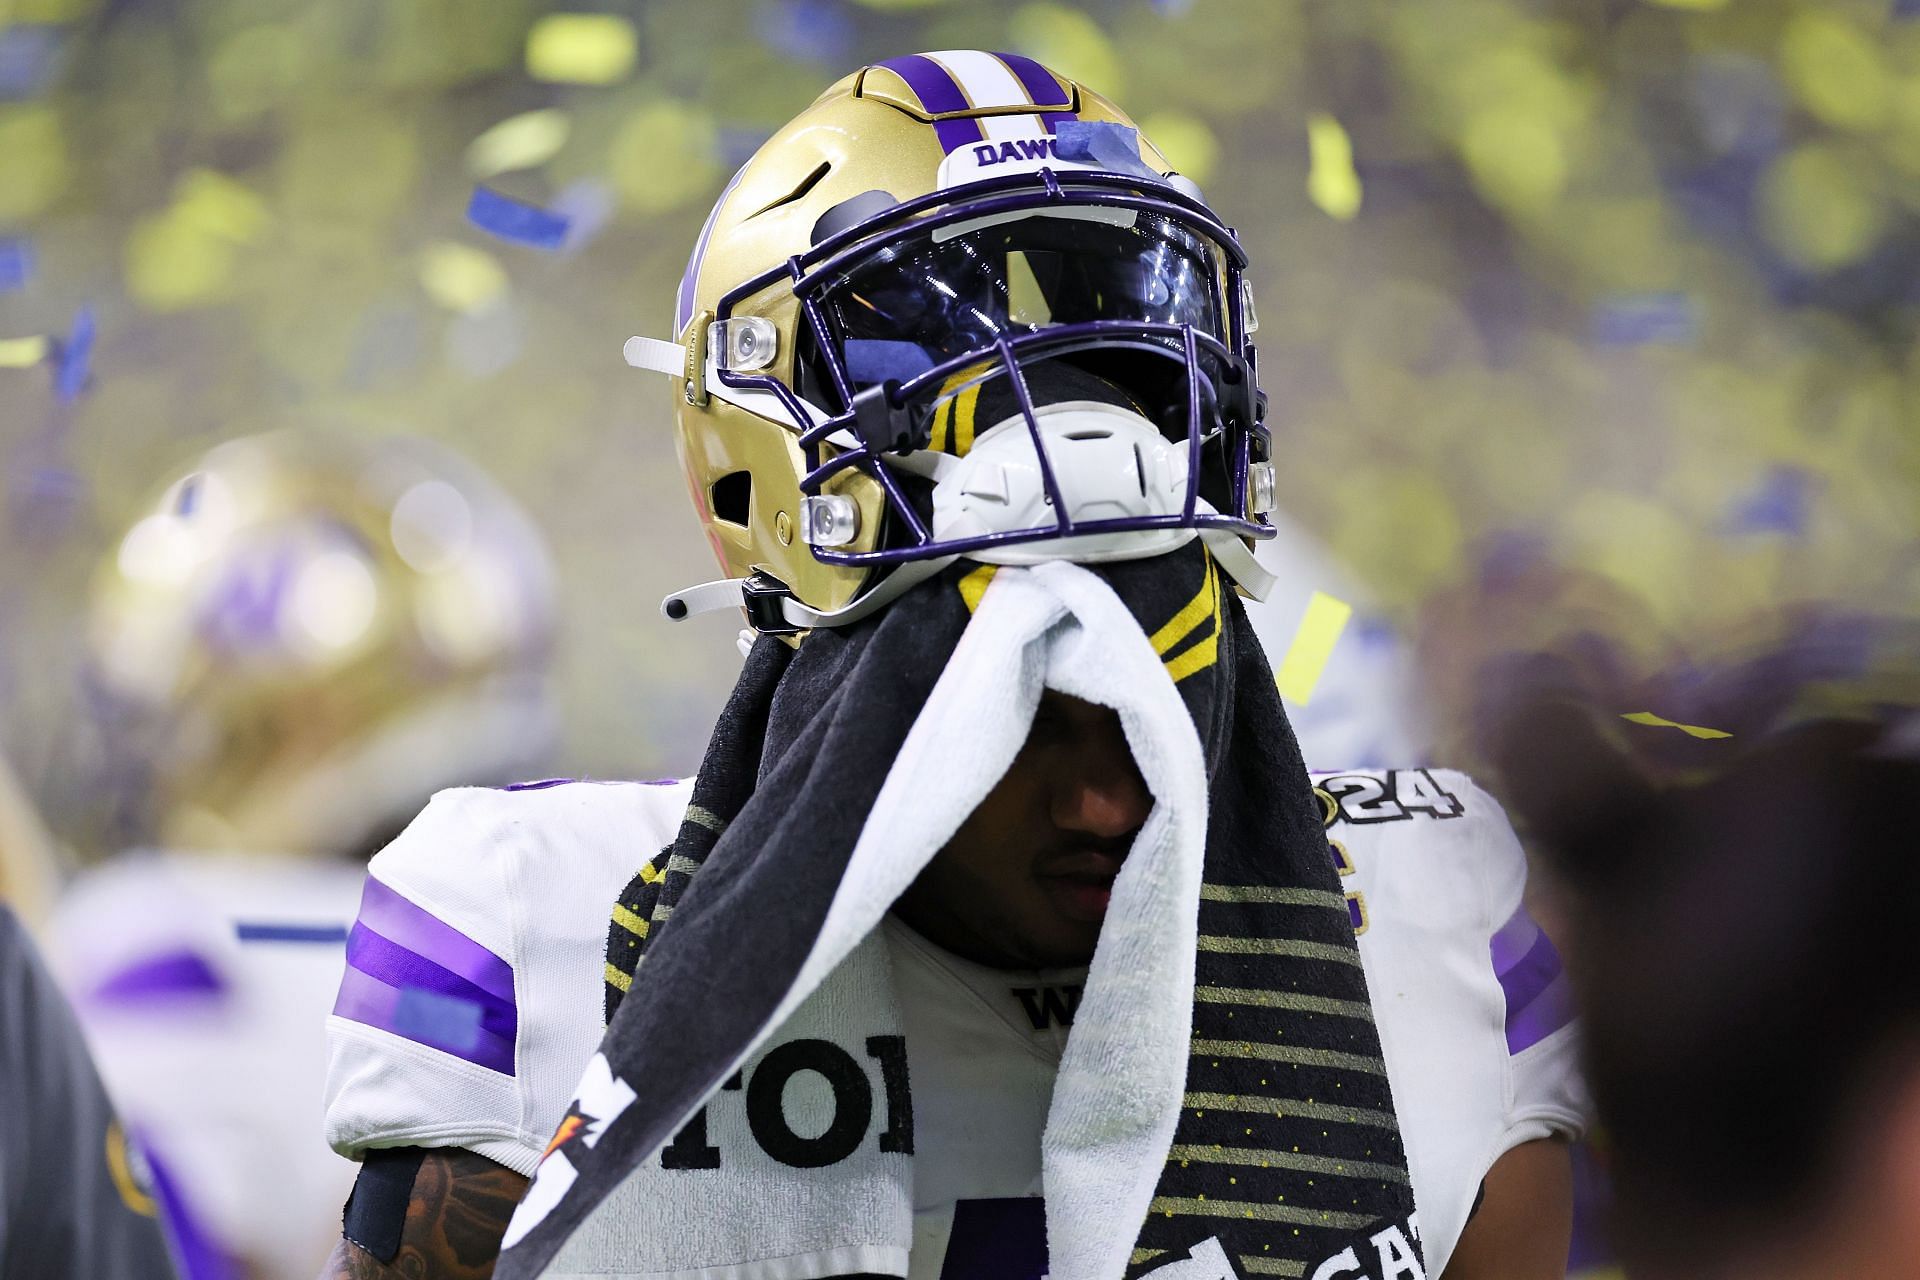 Michael Penix Jr. of the Washington Huskies. (Photo by Stacy Revere/Getty Images)